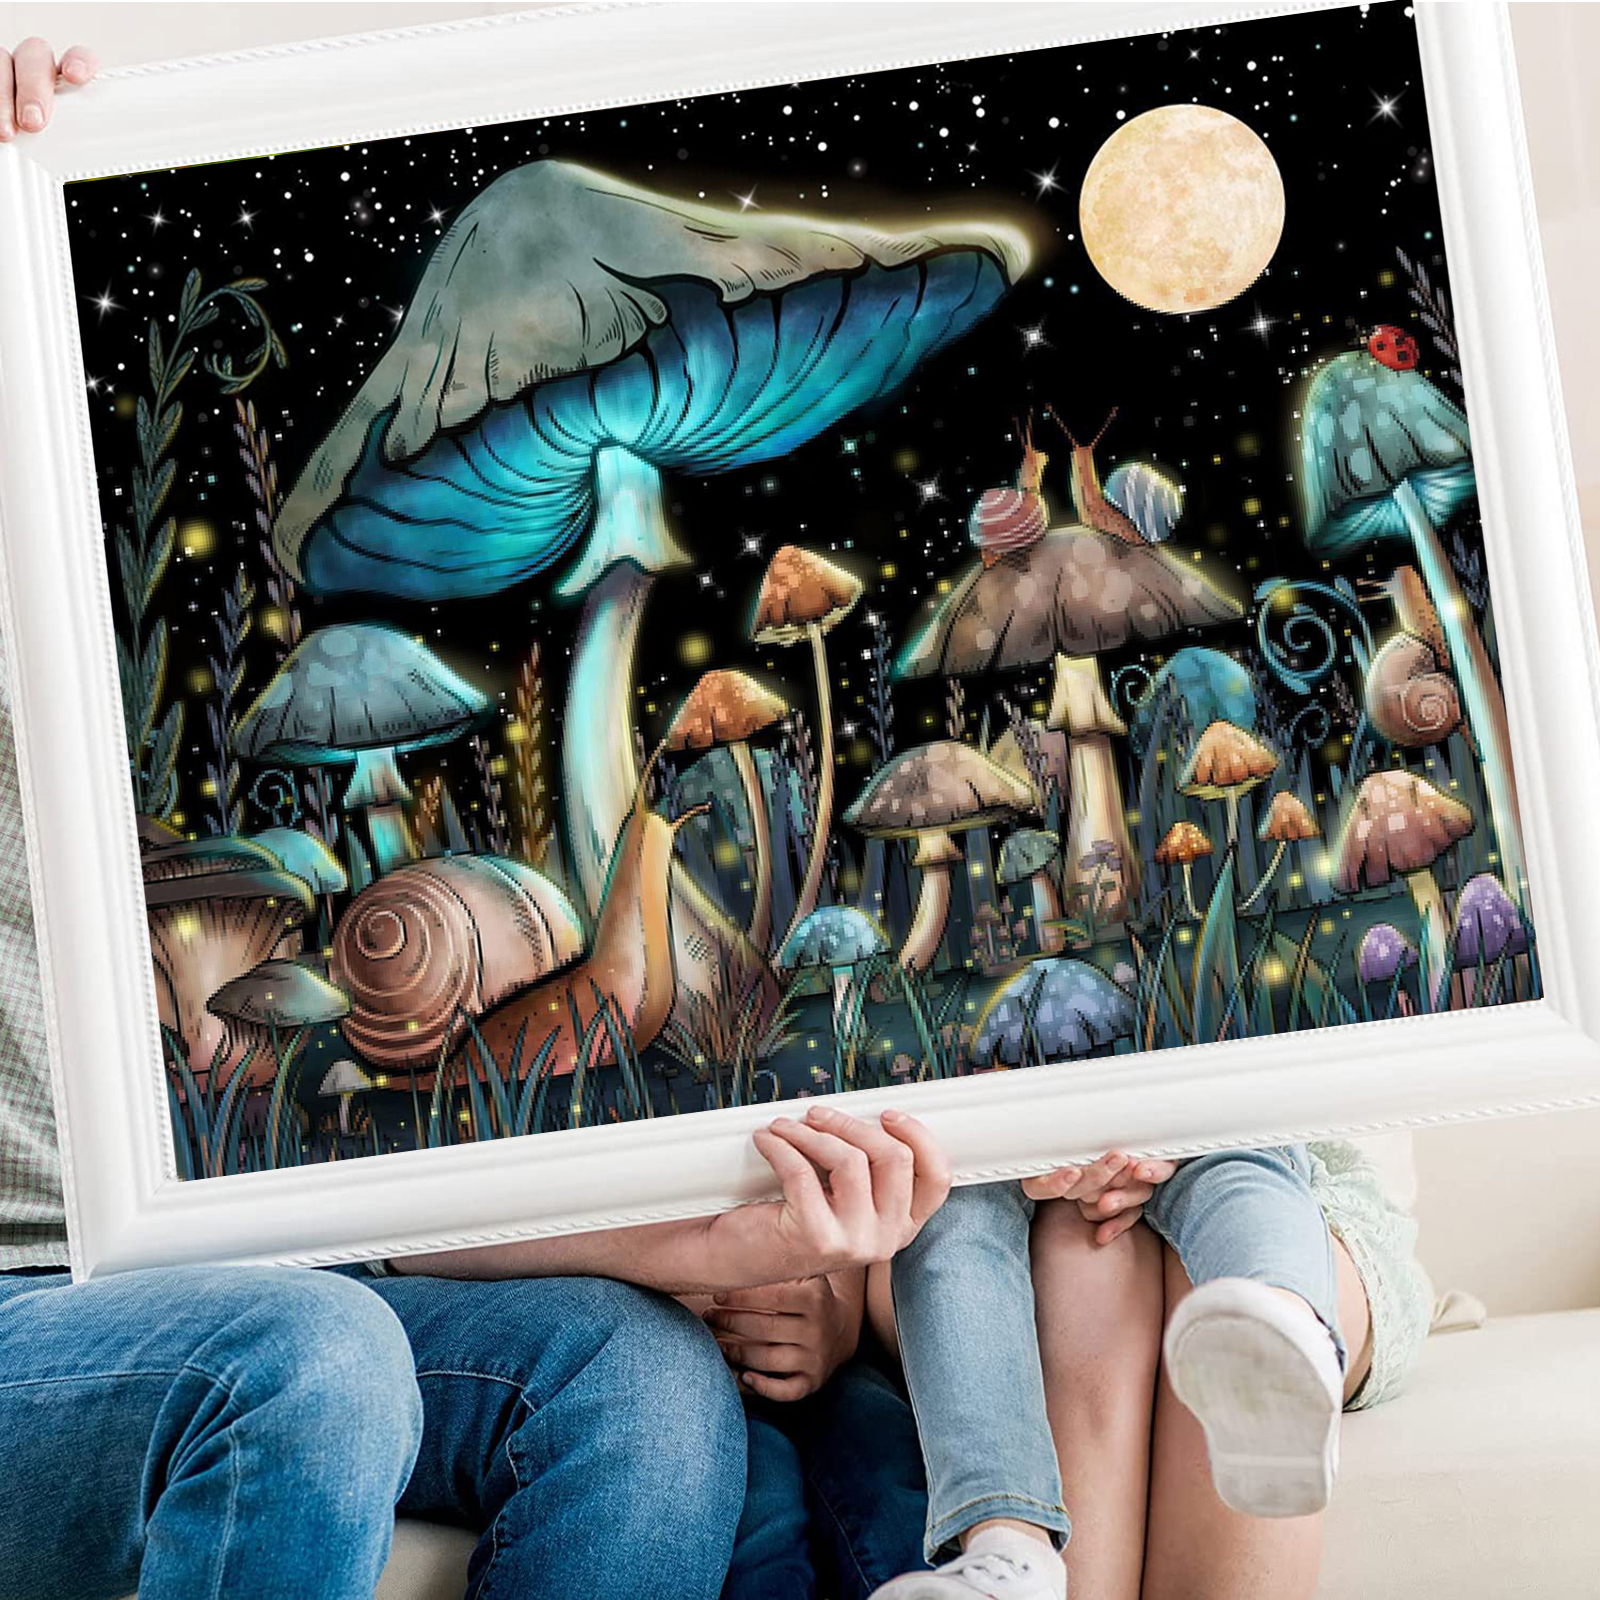 5D DIY Diamond Painting Kits, DIY Full Drill Diamond Art Painting for  Adults, DIY Diamond Crystal Art Painting for Home Wall Decor 11.8x15.7 inch